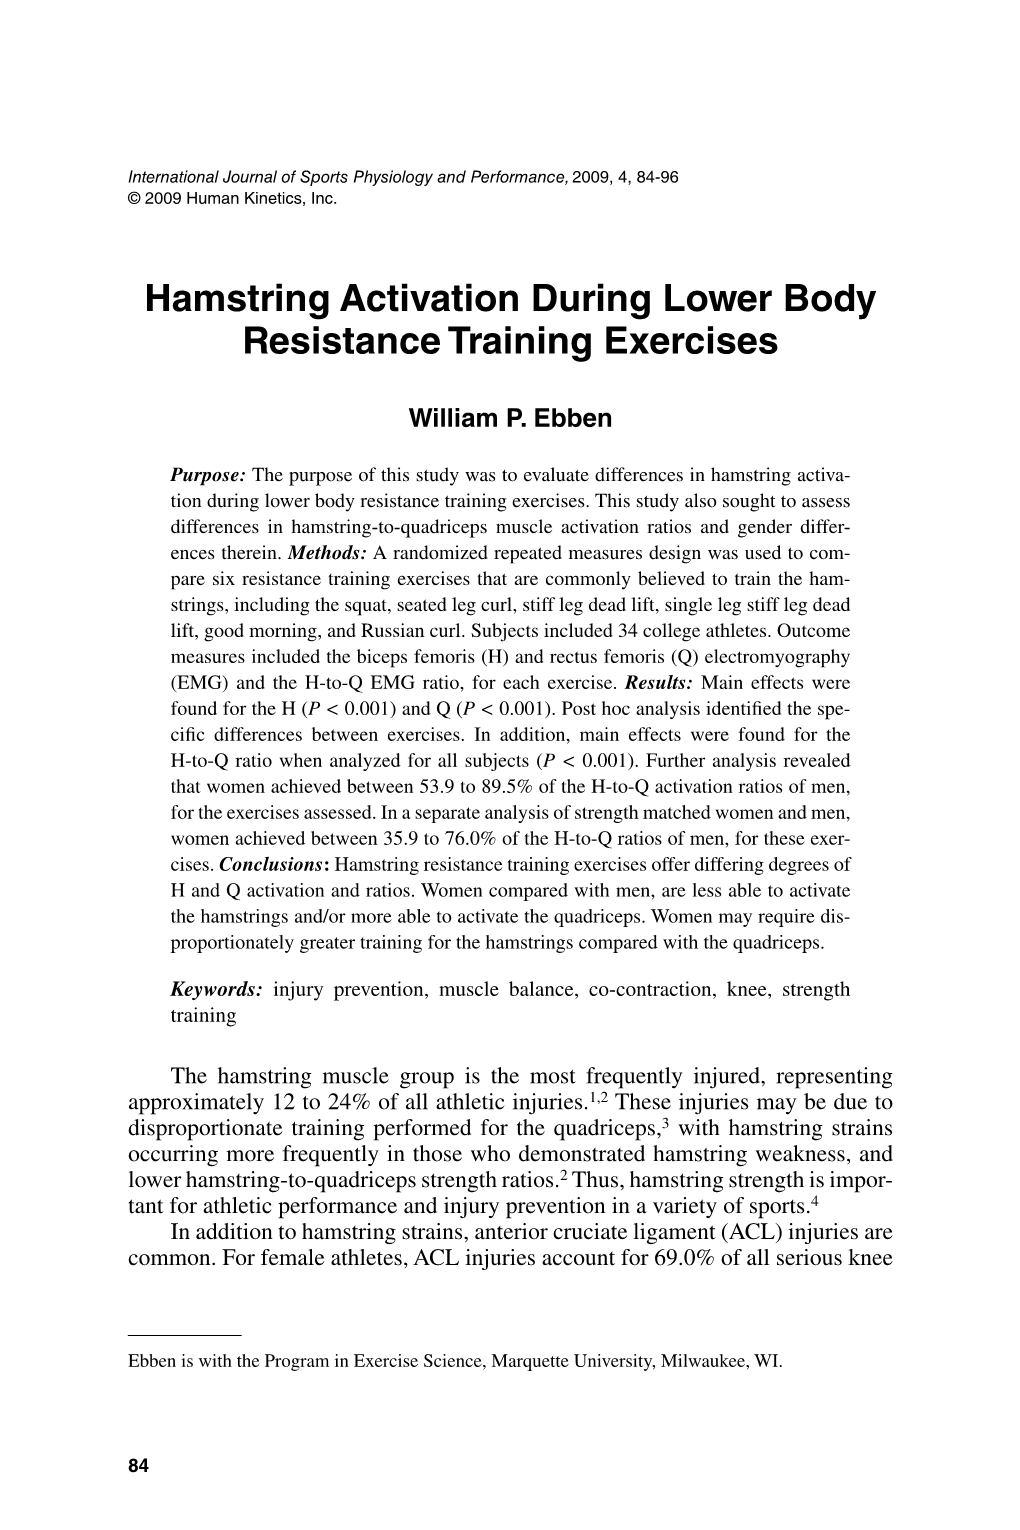 Hamstring Activation During Lower Body Resistance Training Exercises